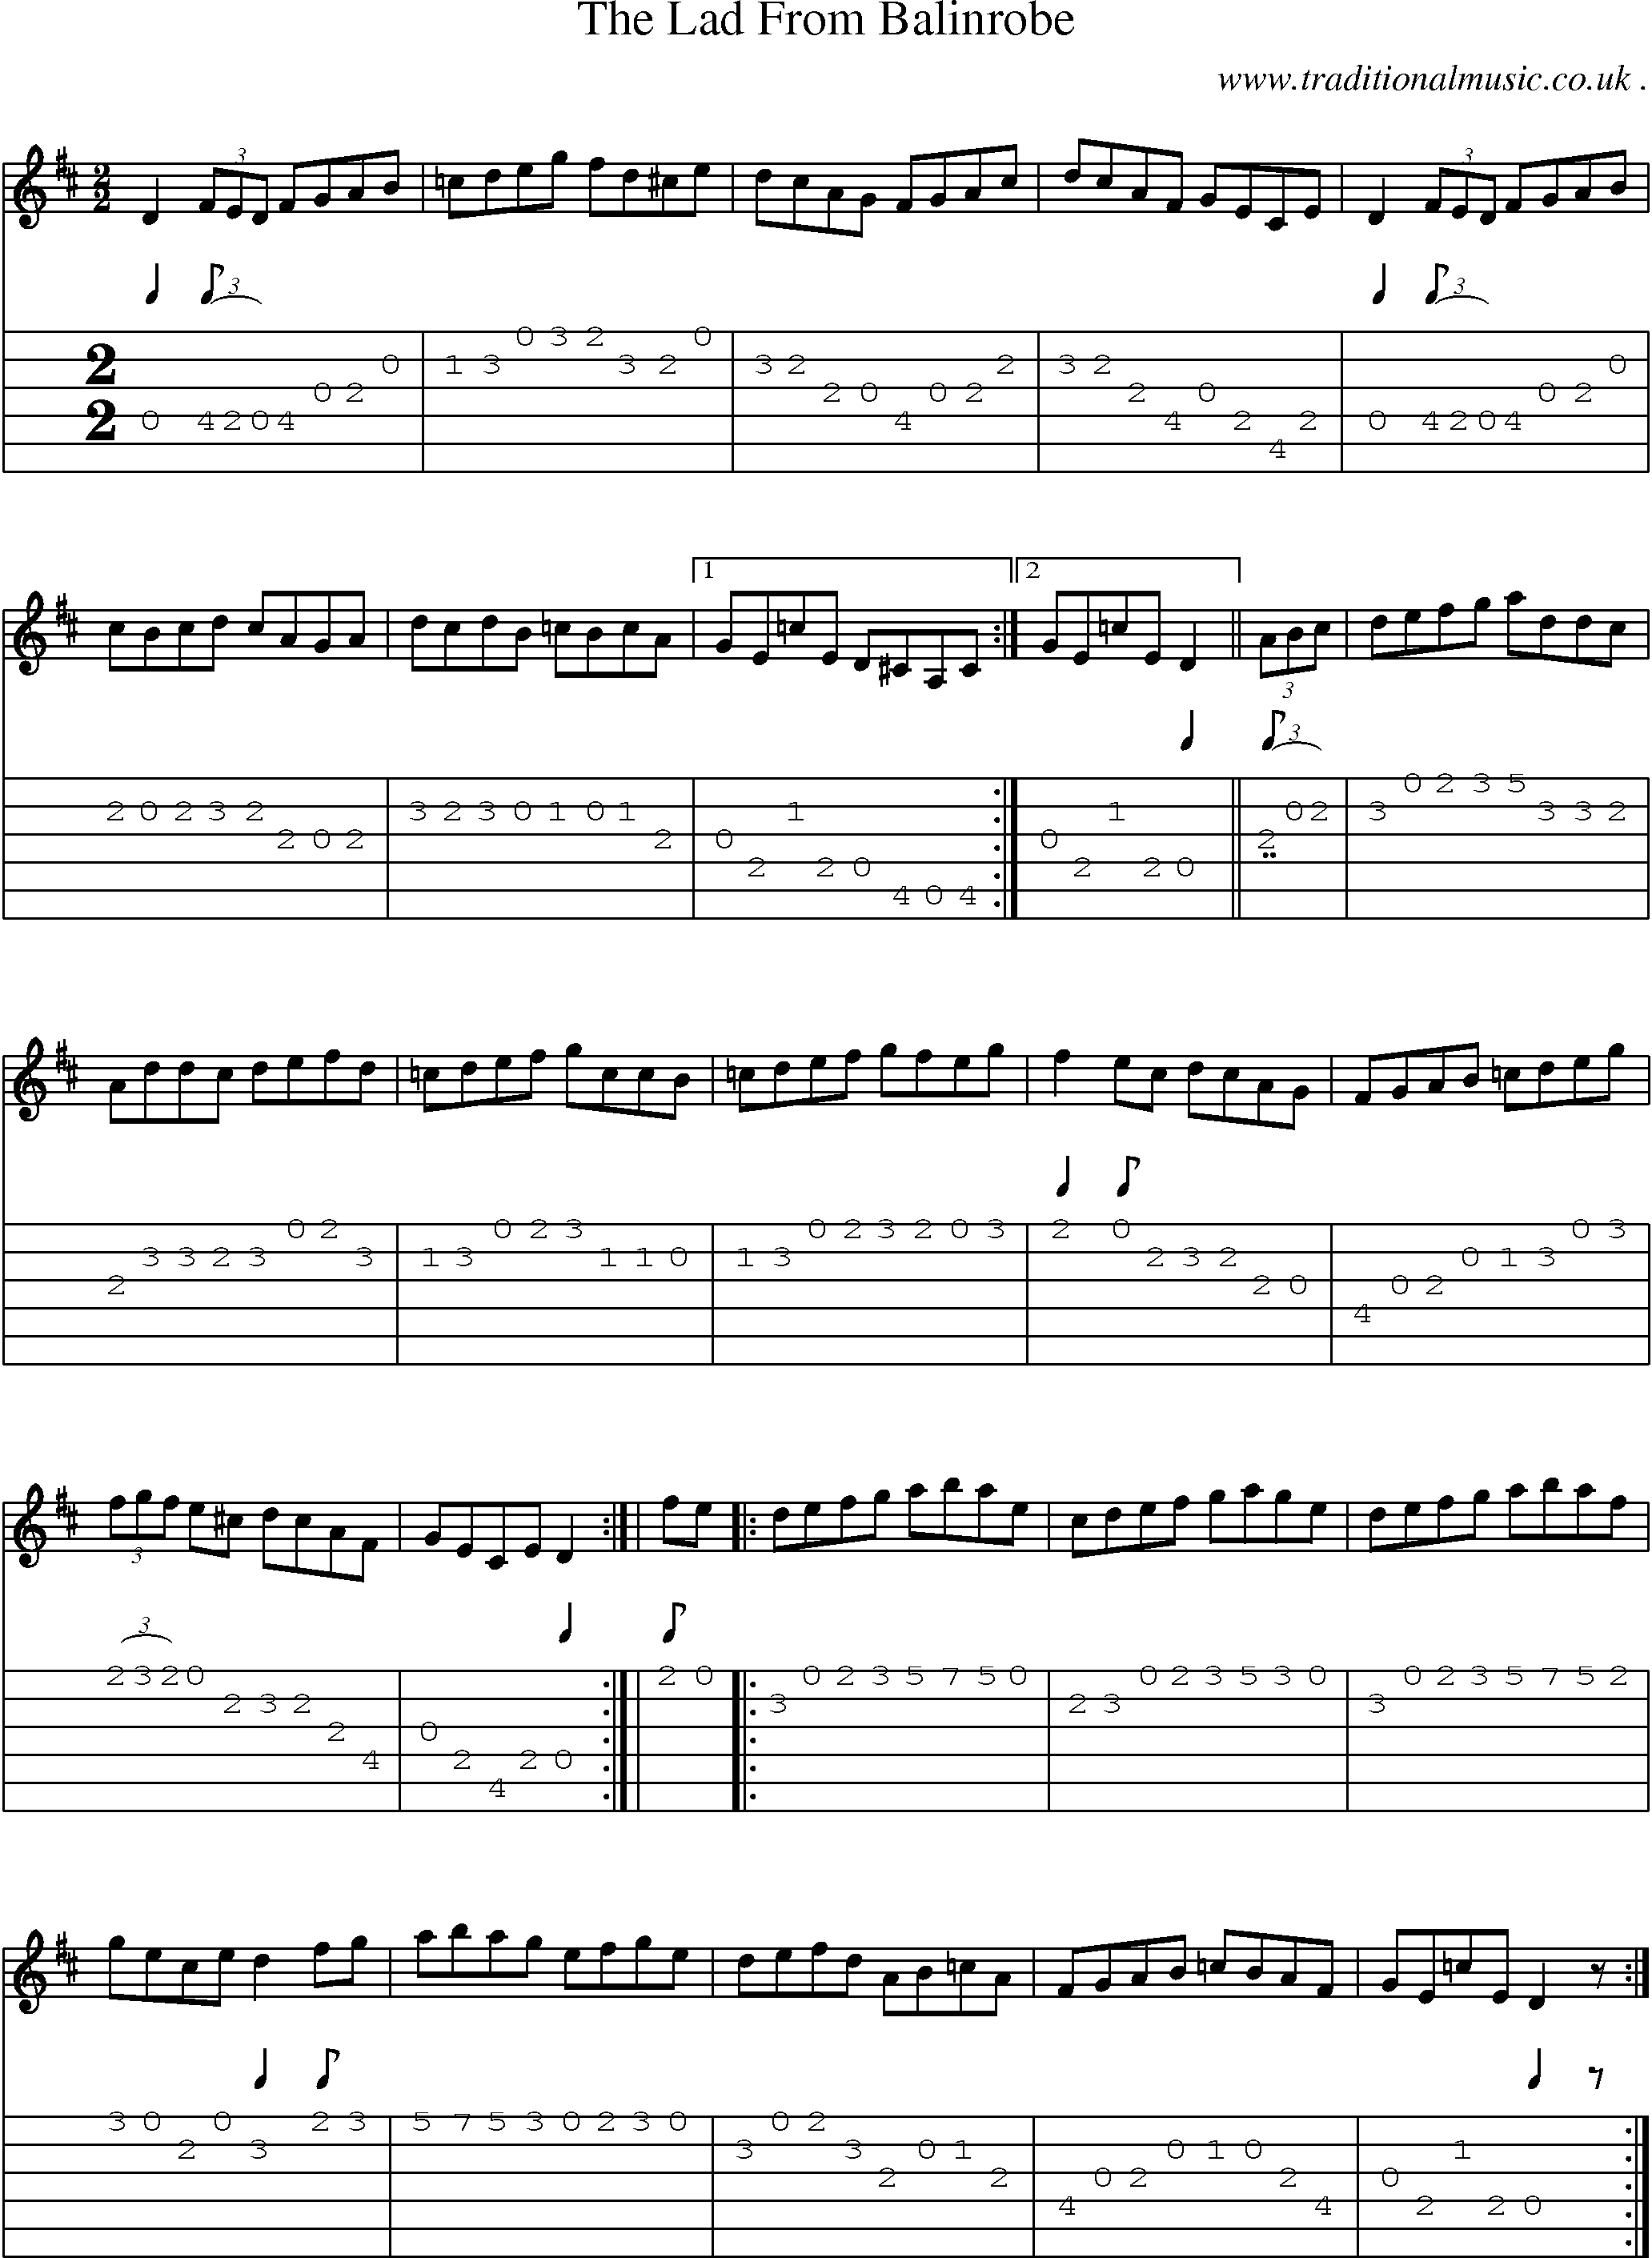 Sheet-Music and Guitar Tabs for The Lad From Balinrobe